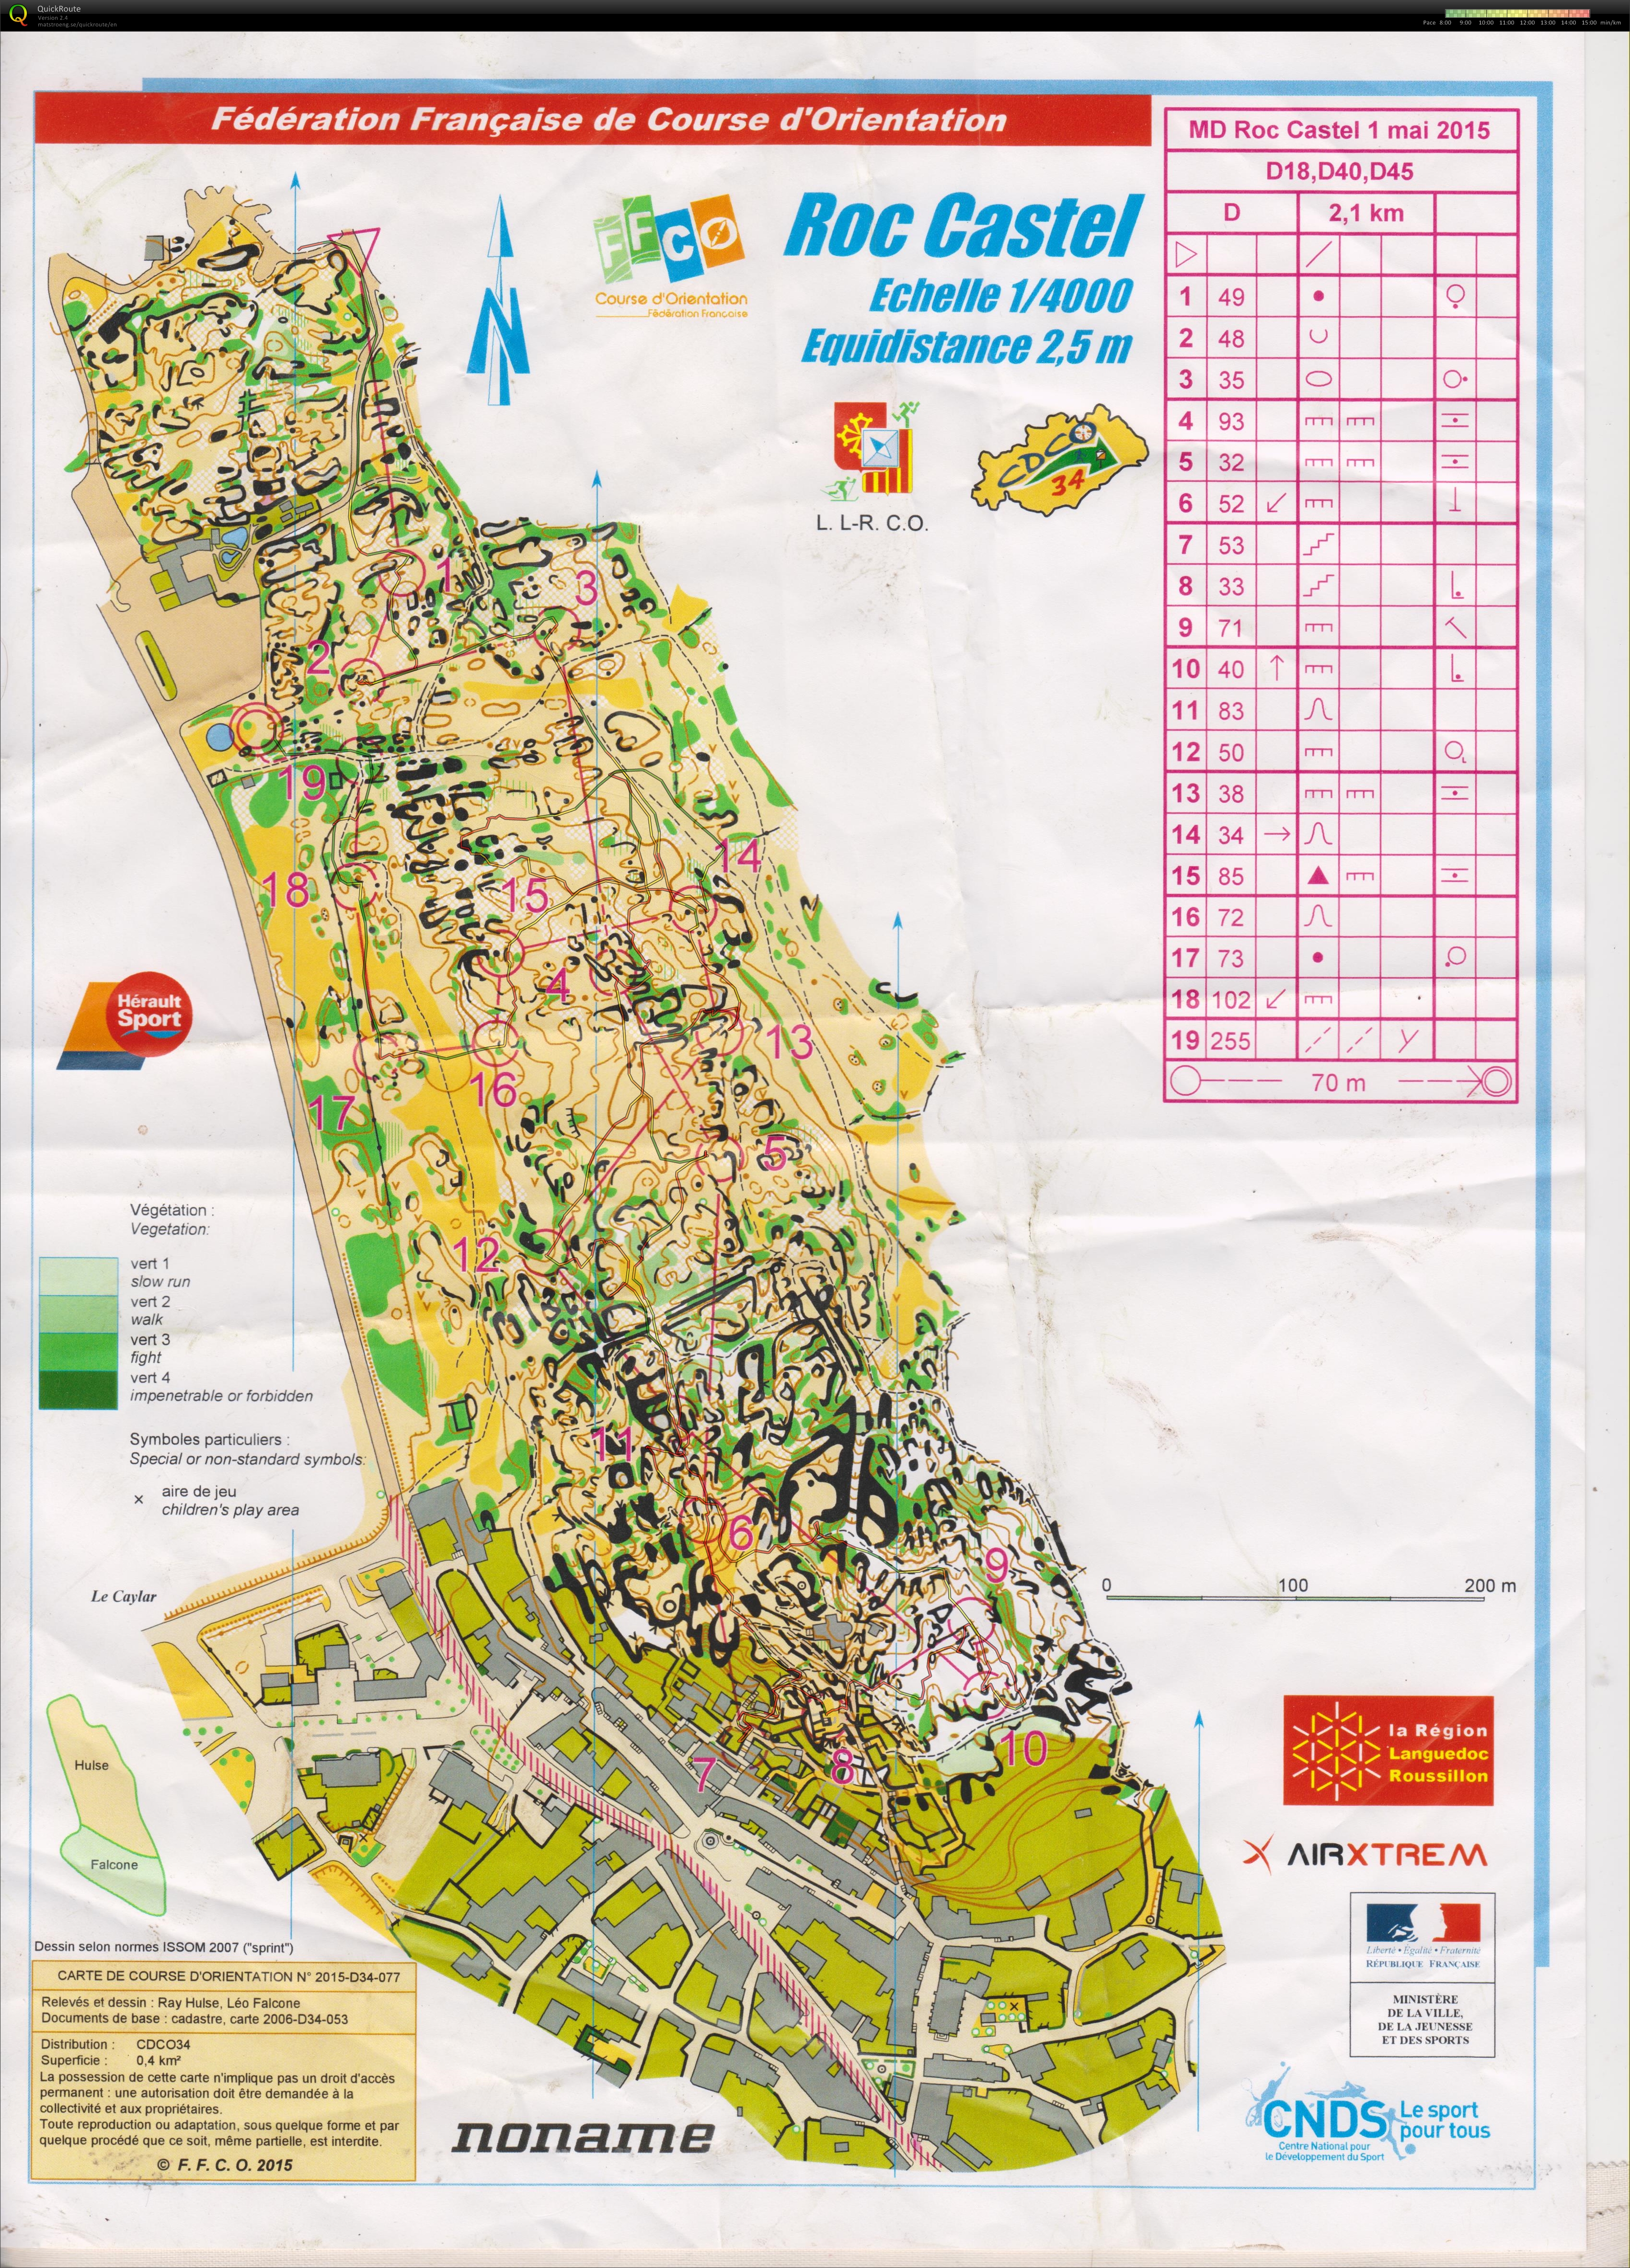 Nationale SO Larzac D18 - Day 1 - Le Caylar (2015-05-01)